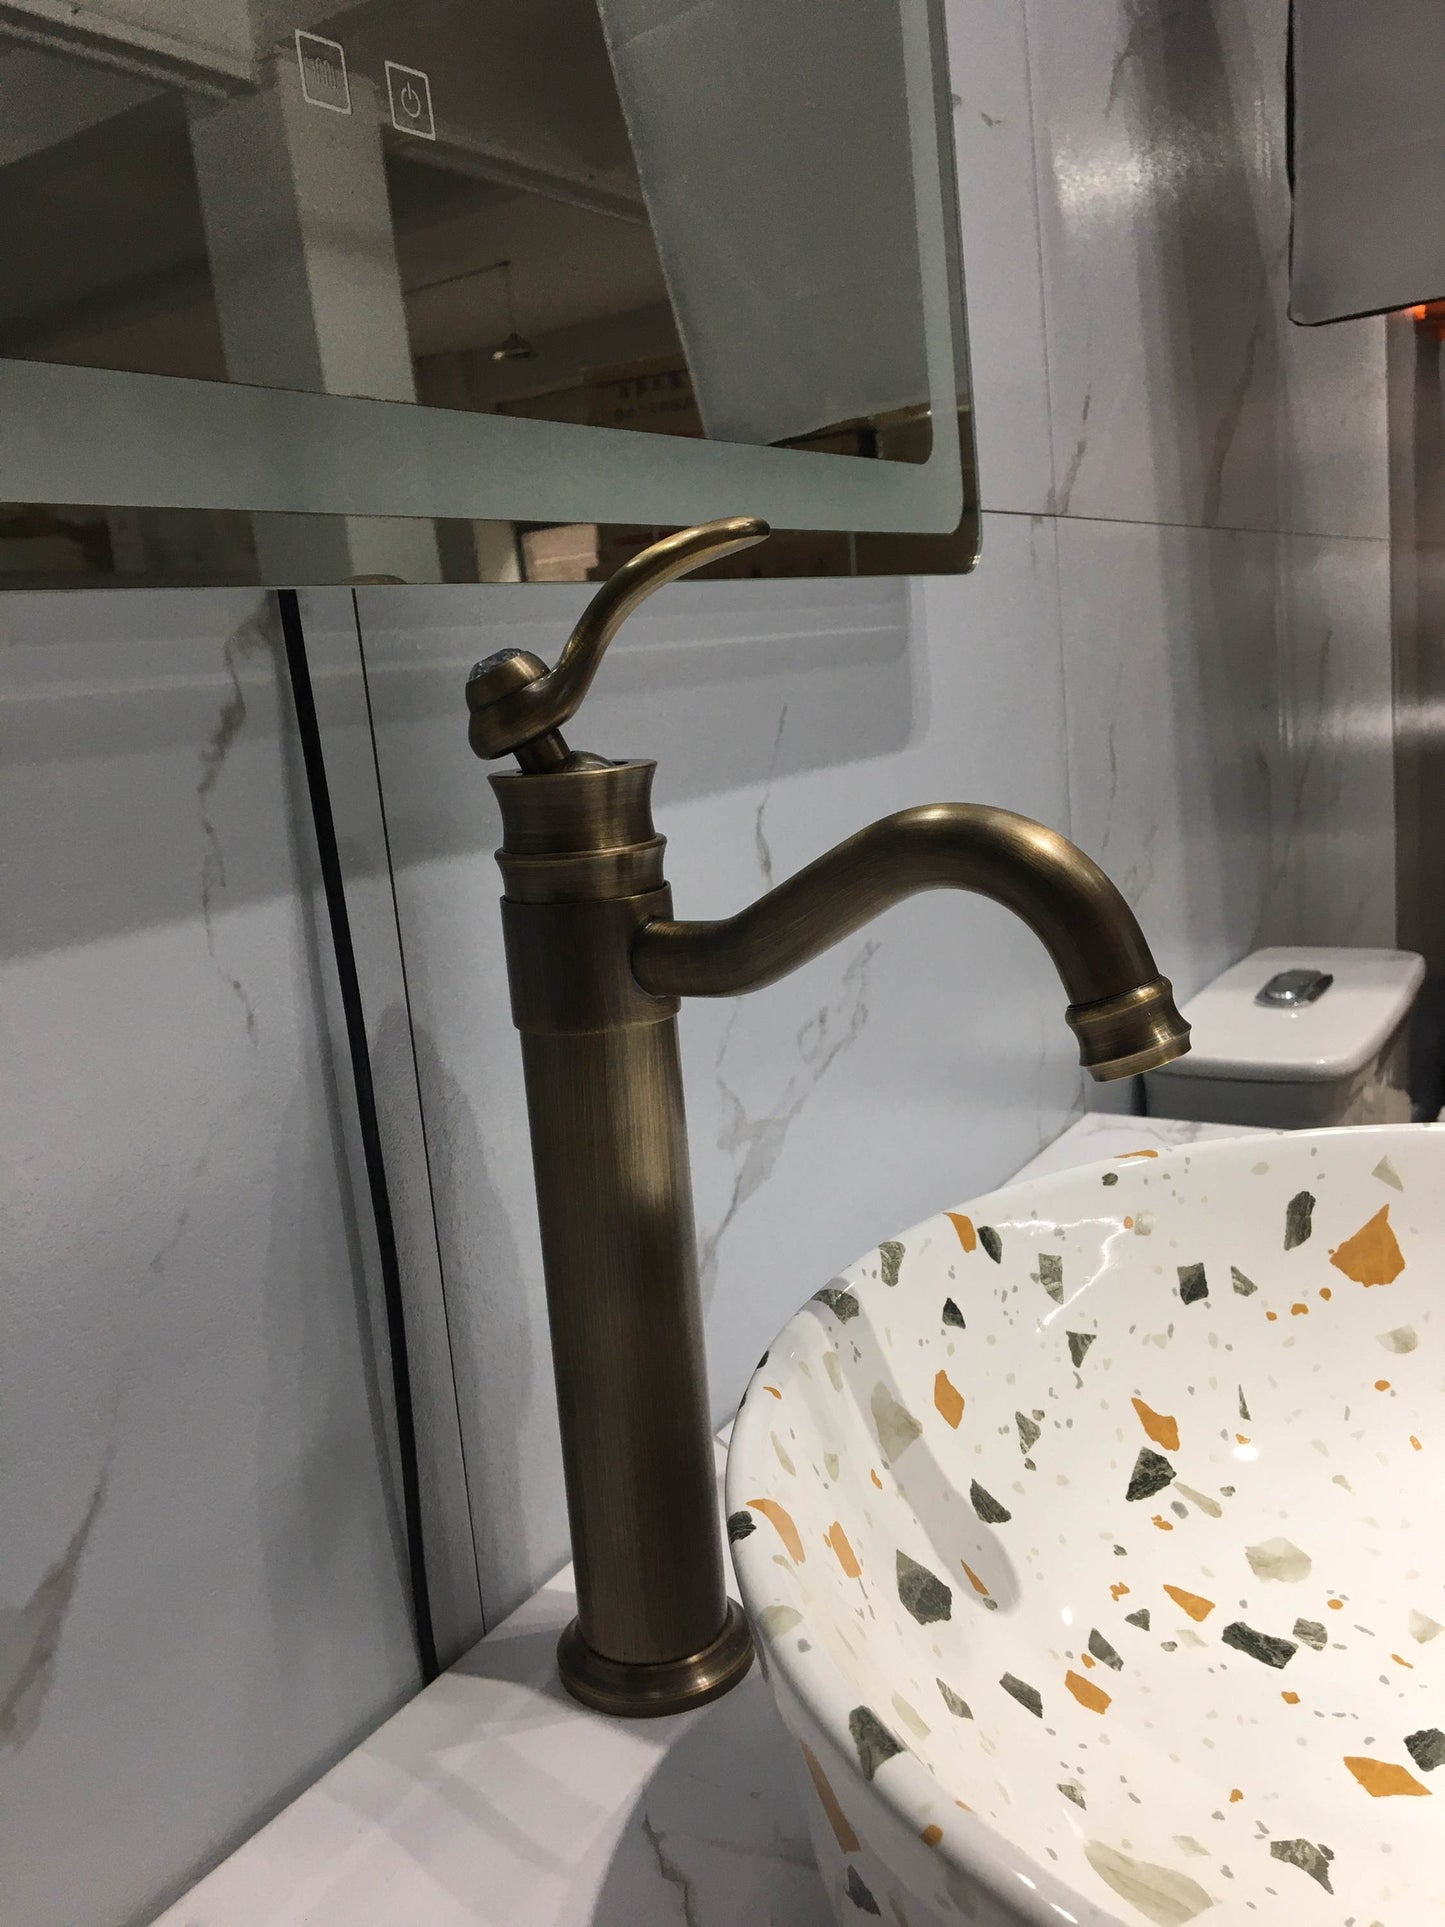 Brushed Single Handle Faucet: Curved faucet / Single handle faucet / Clear crystal cap detail / Brushed Brass